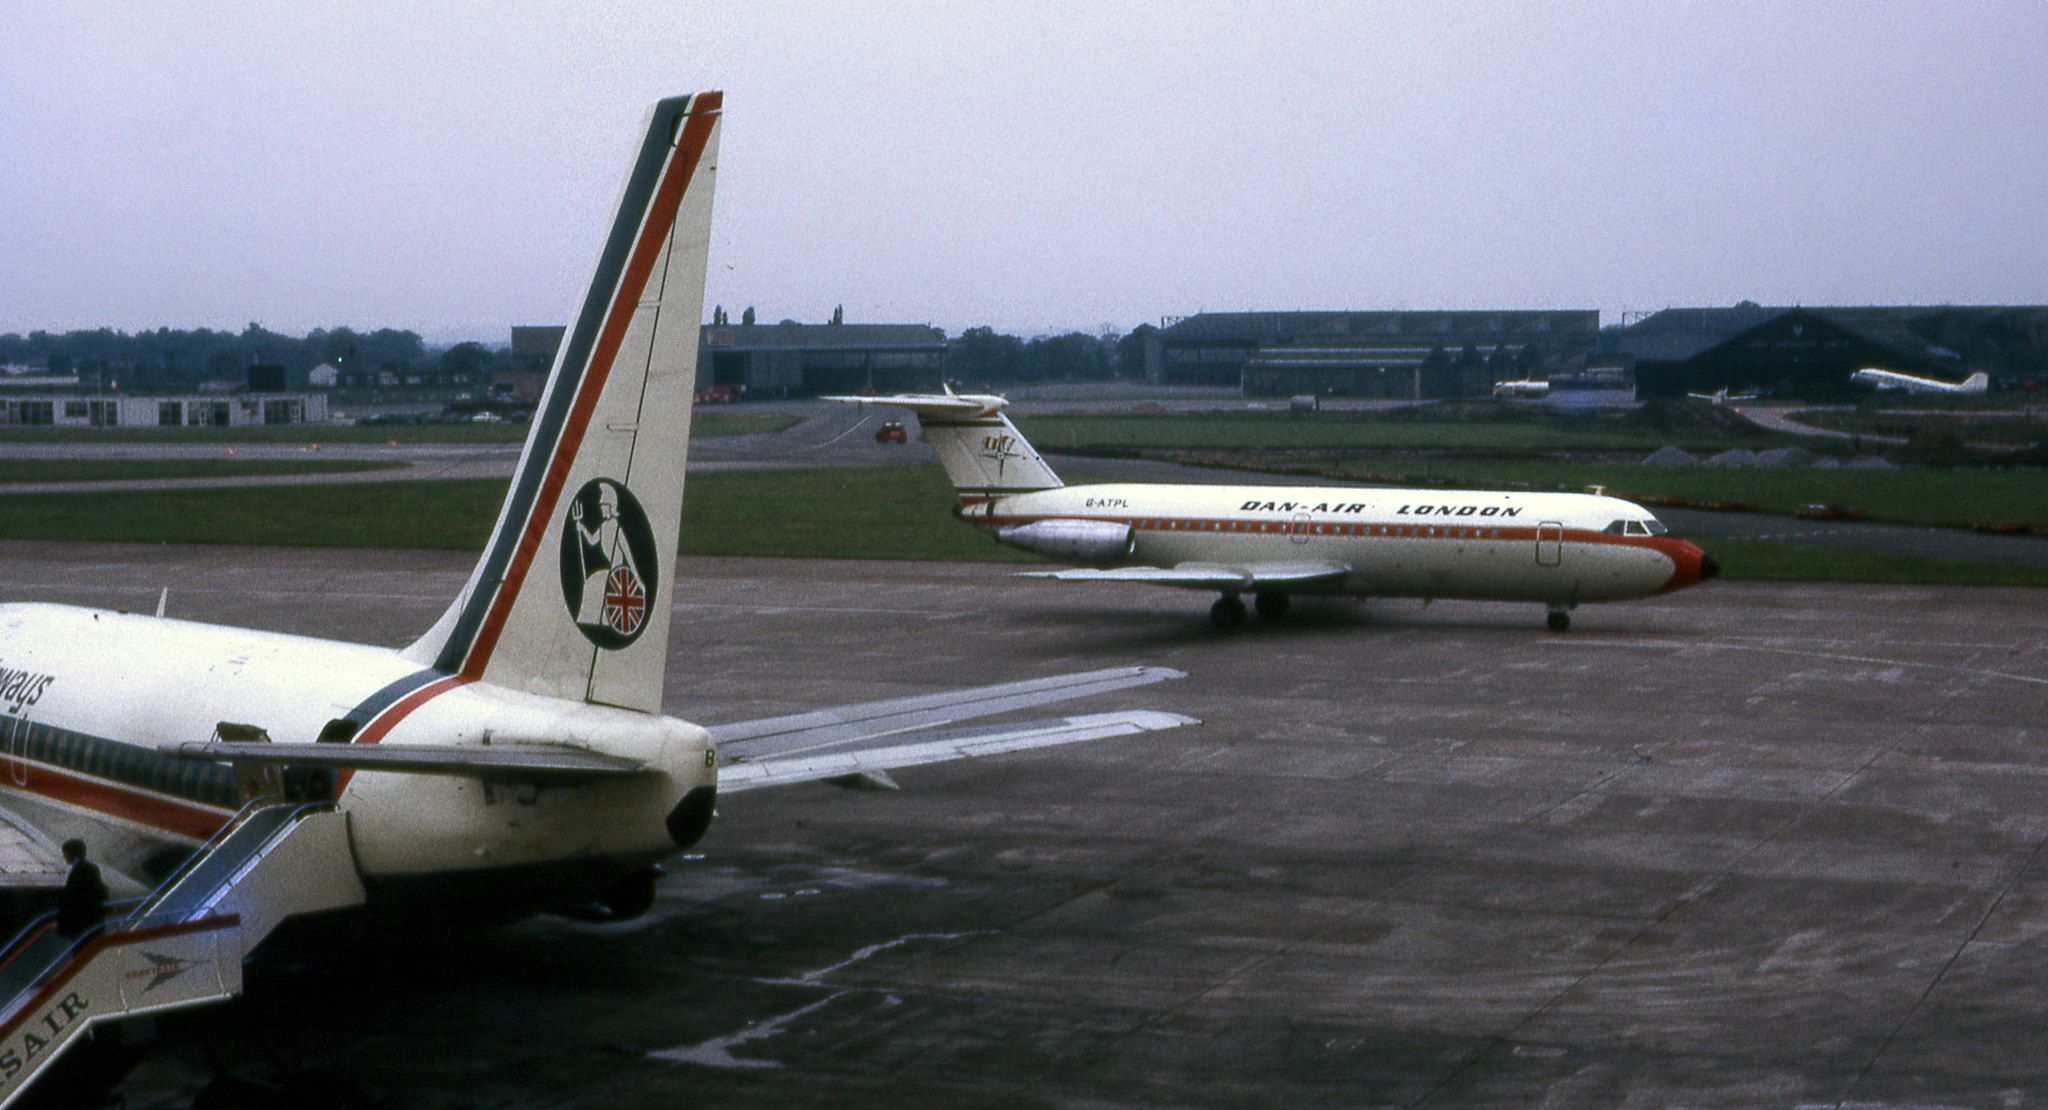 Multiple aircraft parked or taxiing at Manchester Airport circa 1972.